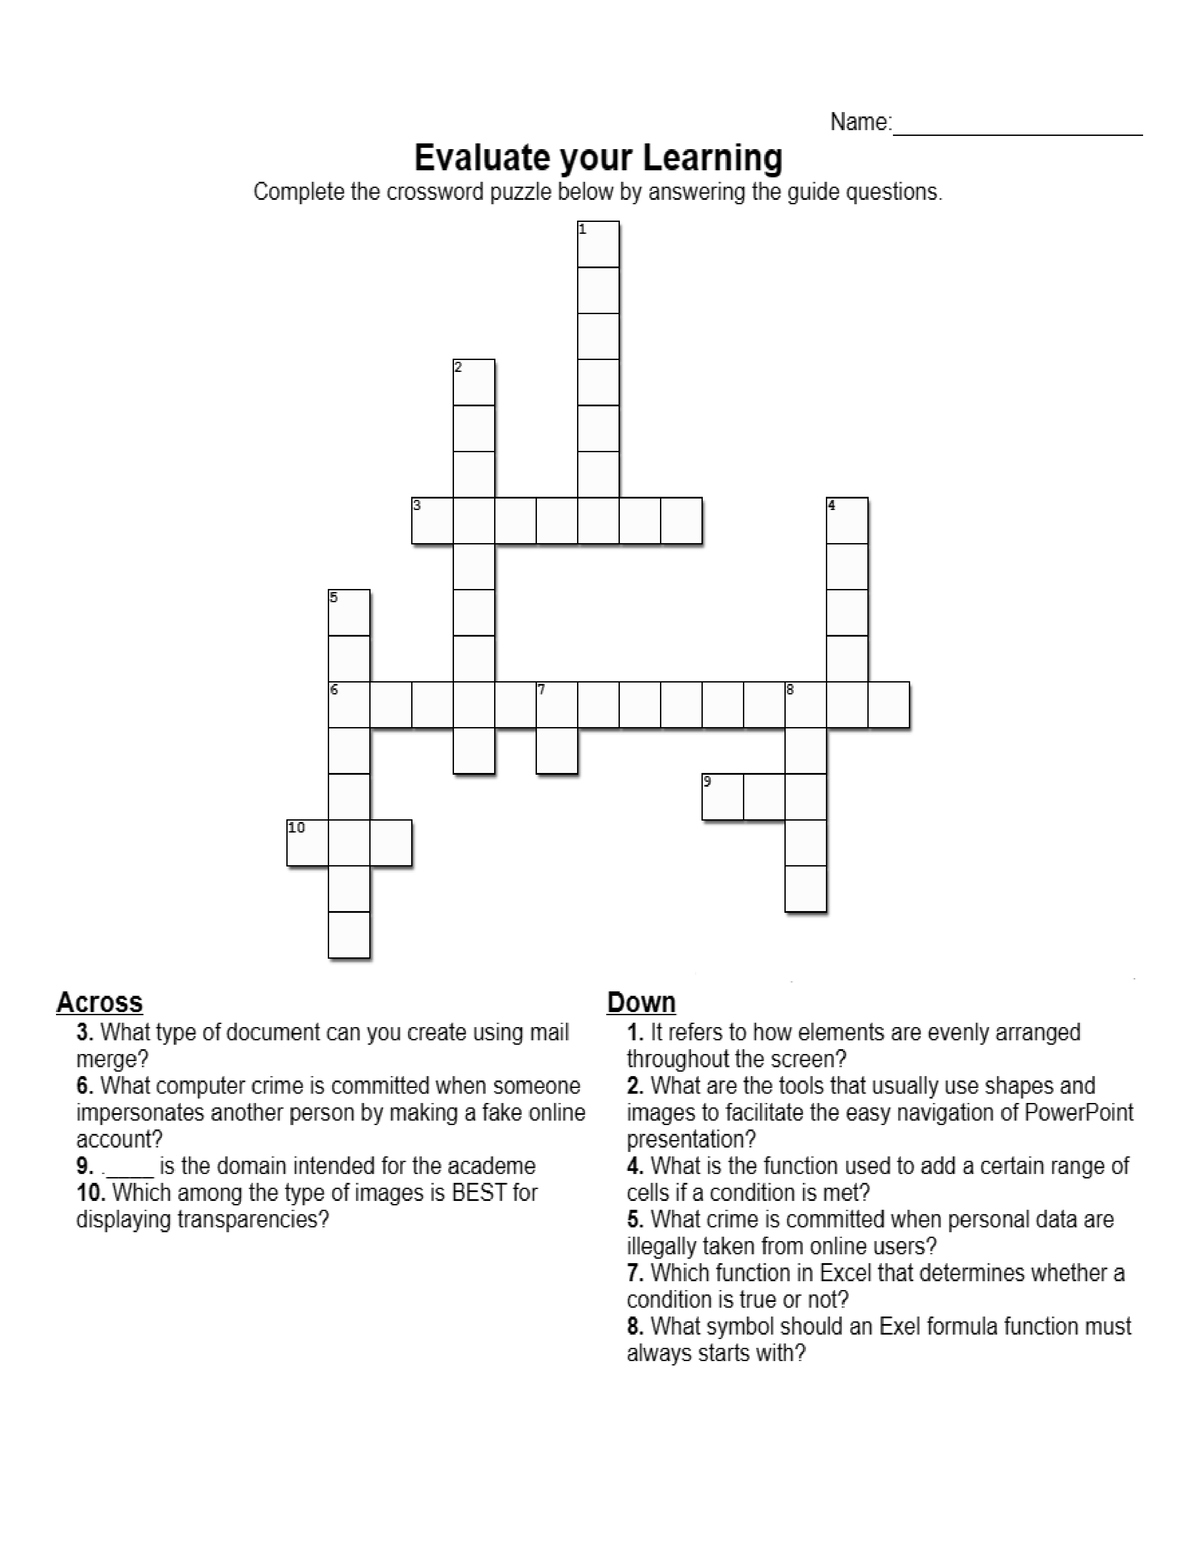 Activity 8 Crossword Mail merge evaluation through a cross word